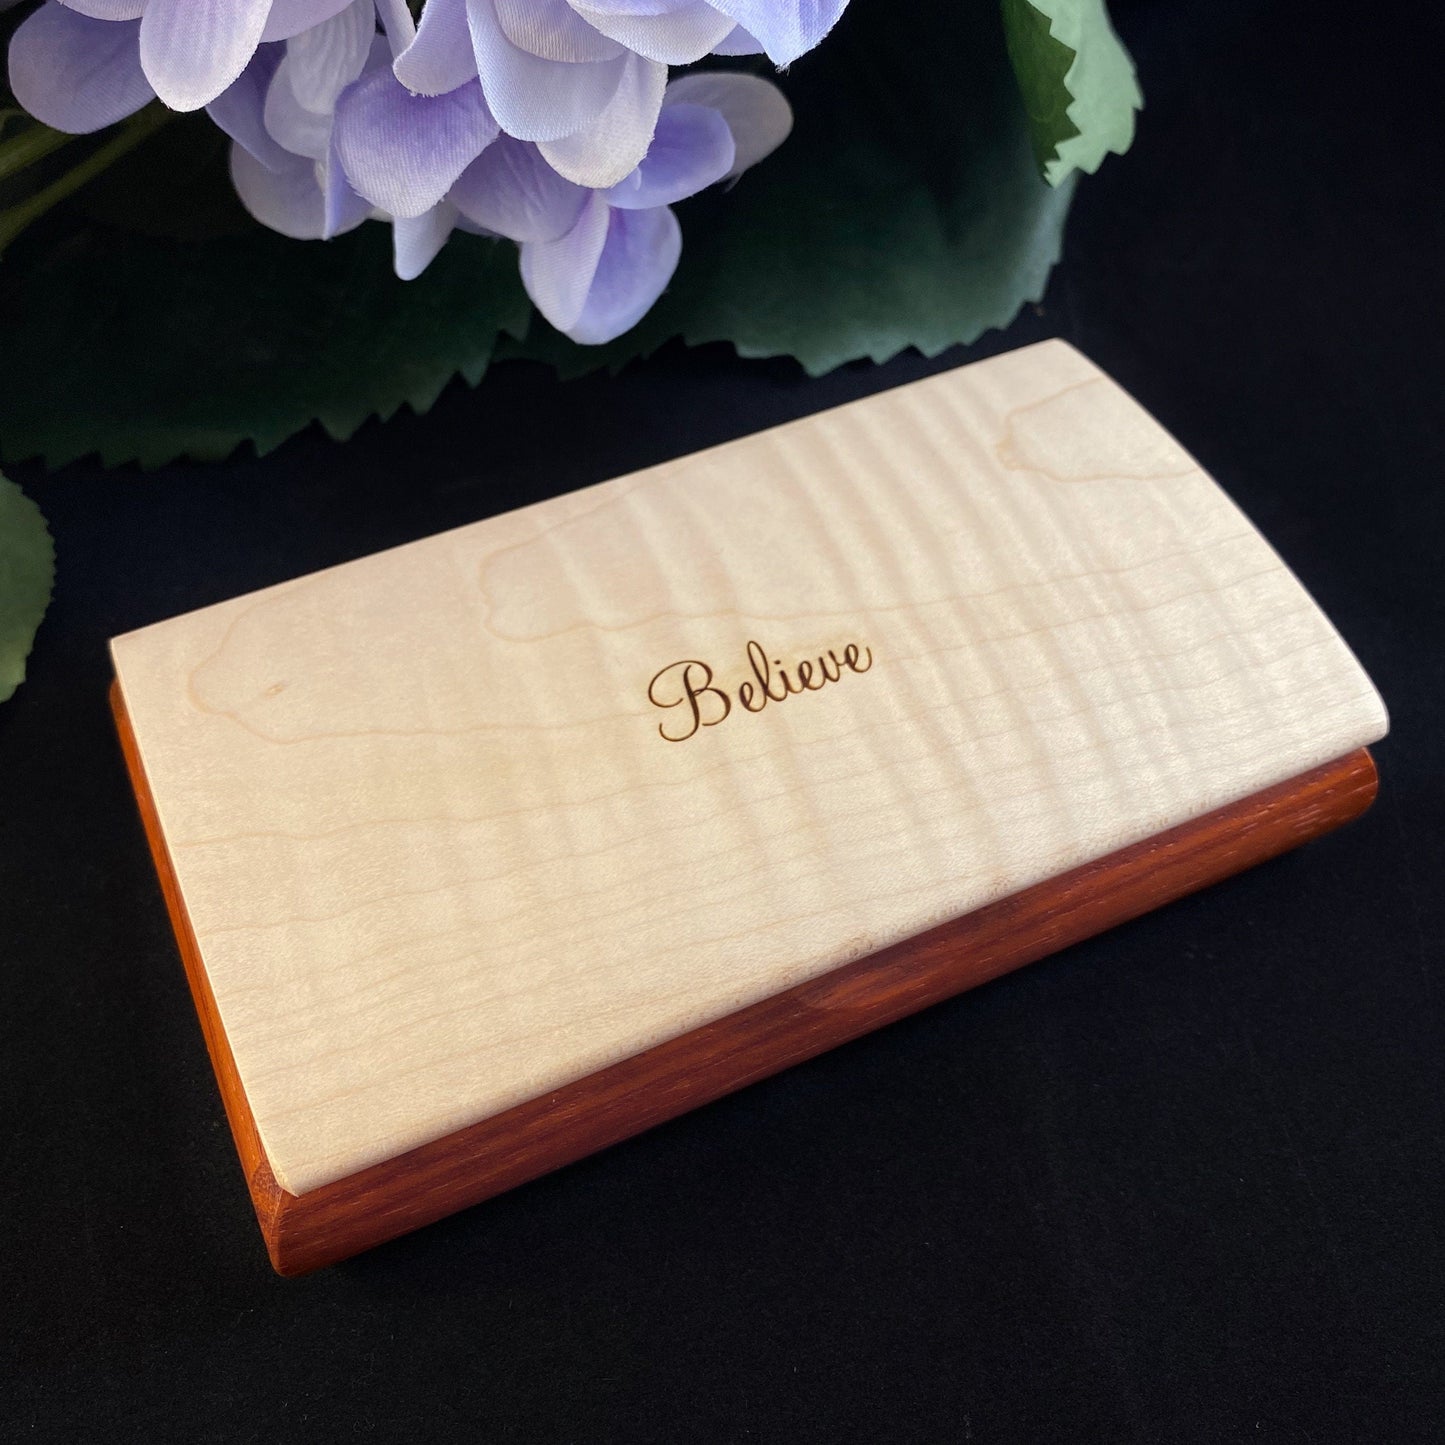 Believe Quote Box from Mikutowski Woodworking Handmade Wooden Box with Curly Maple and Padauk